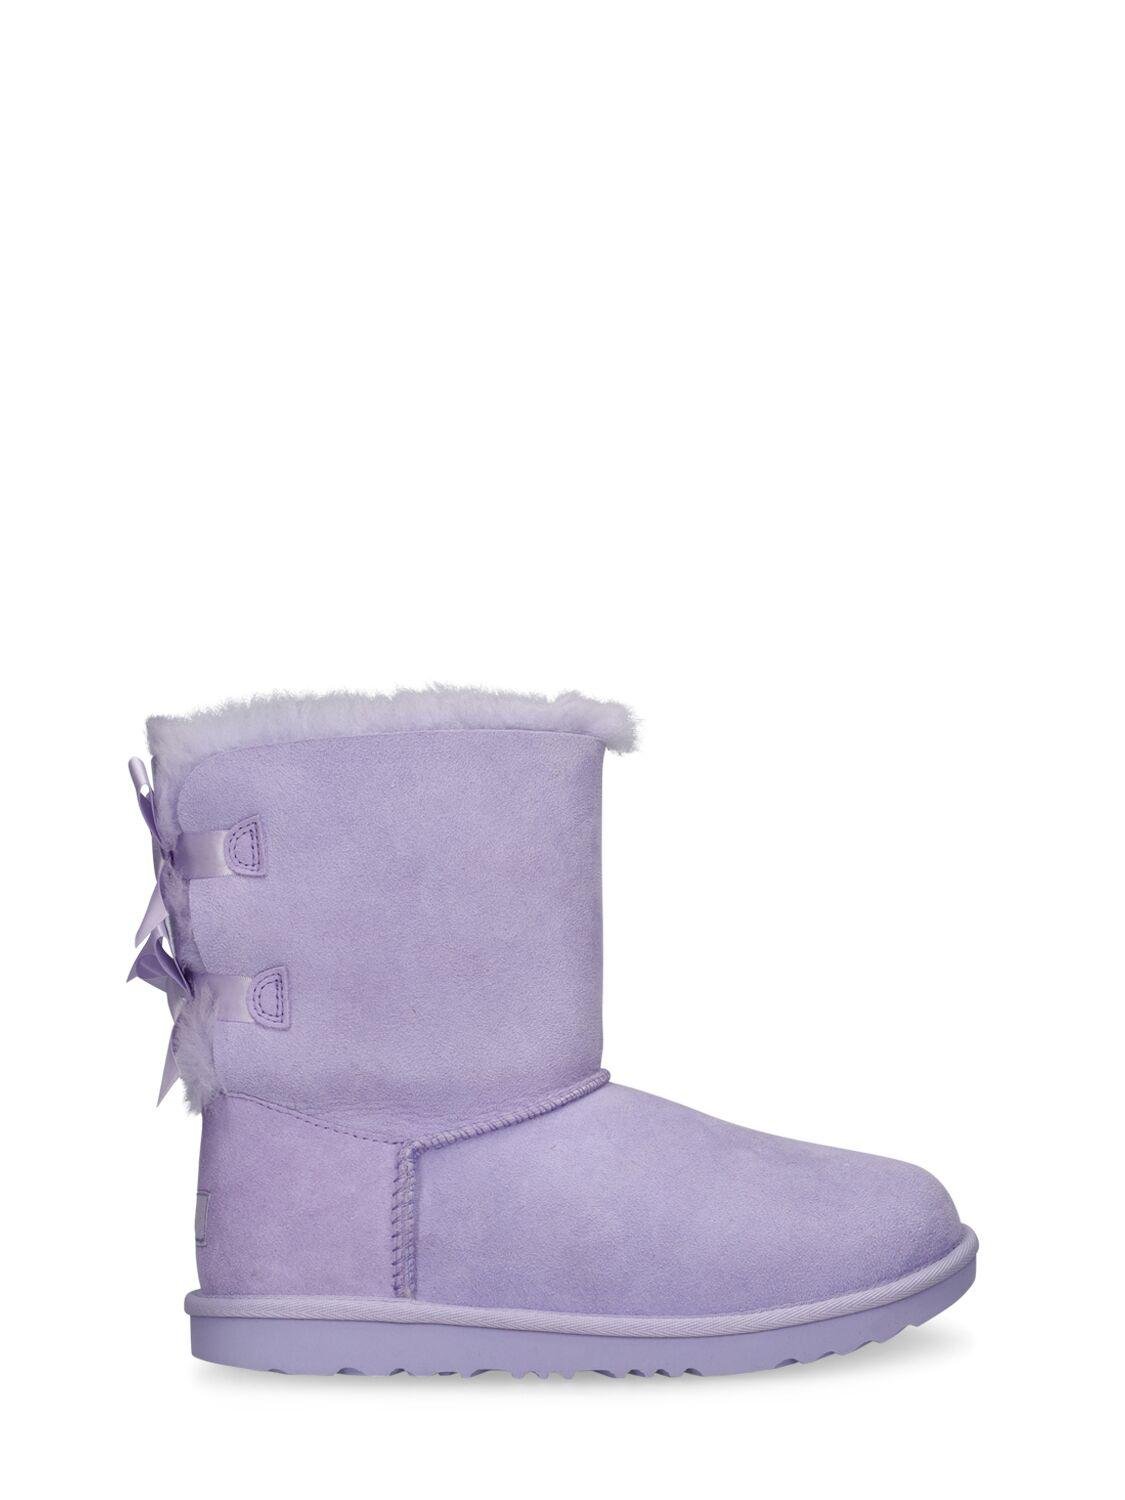 Bailey Bow Ii Shearling Boots by UGG